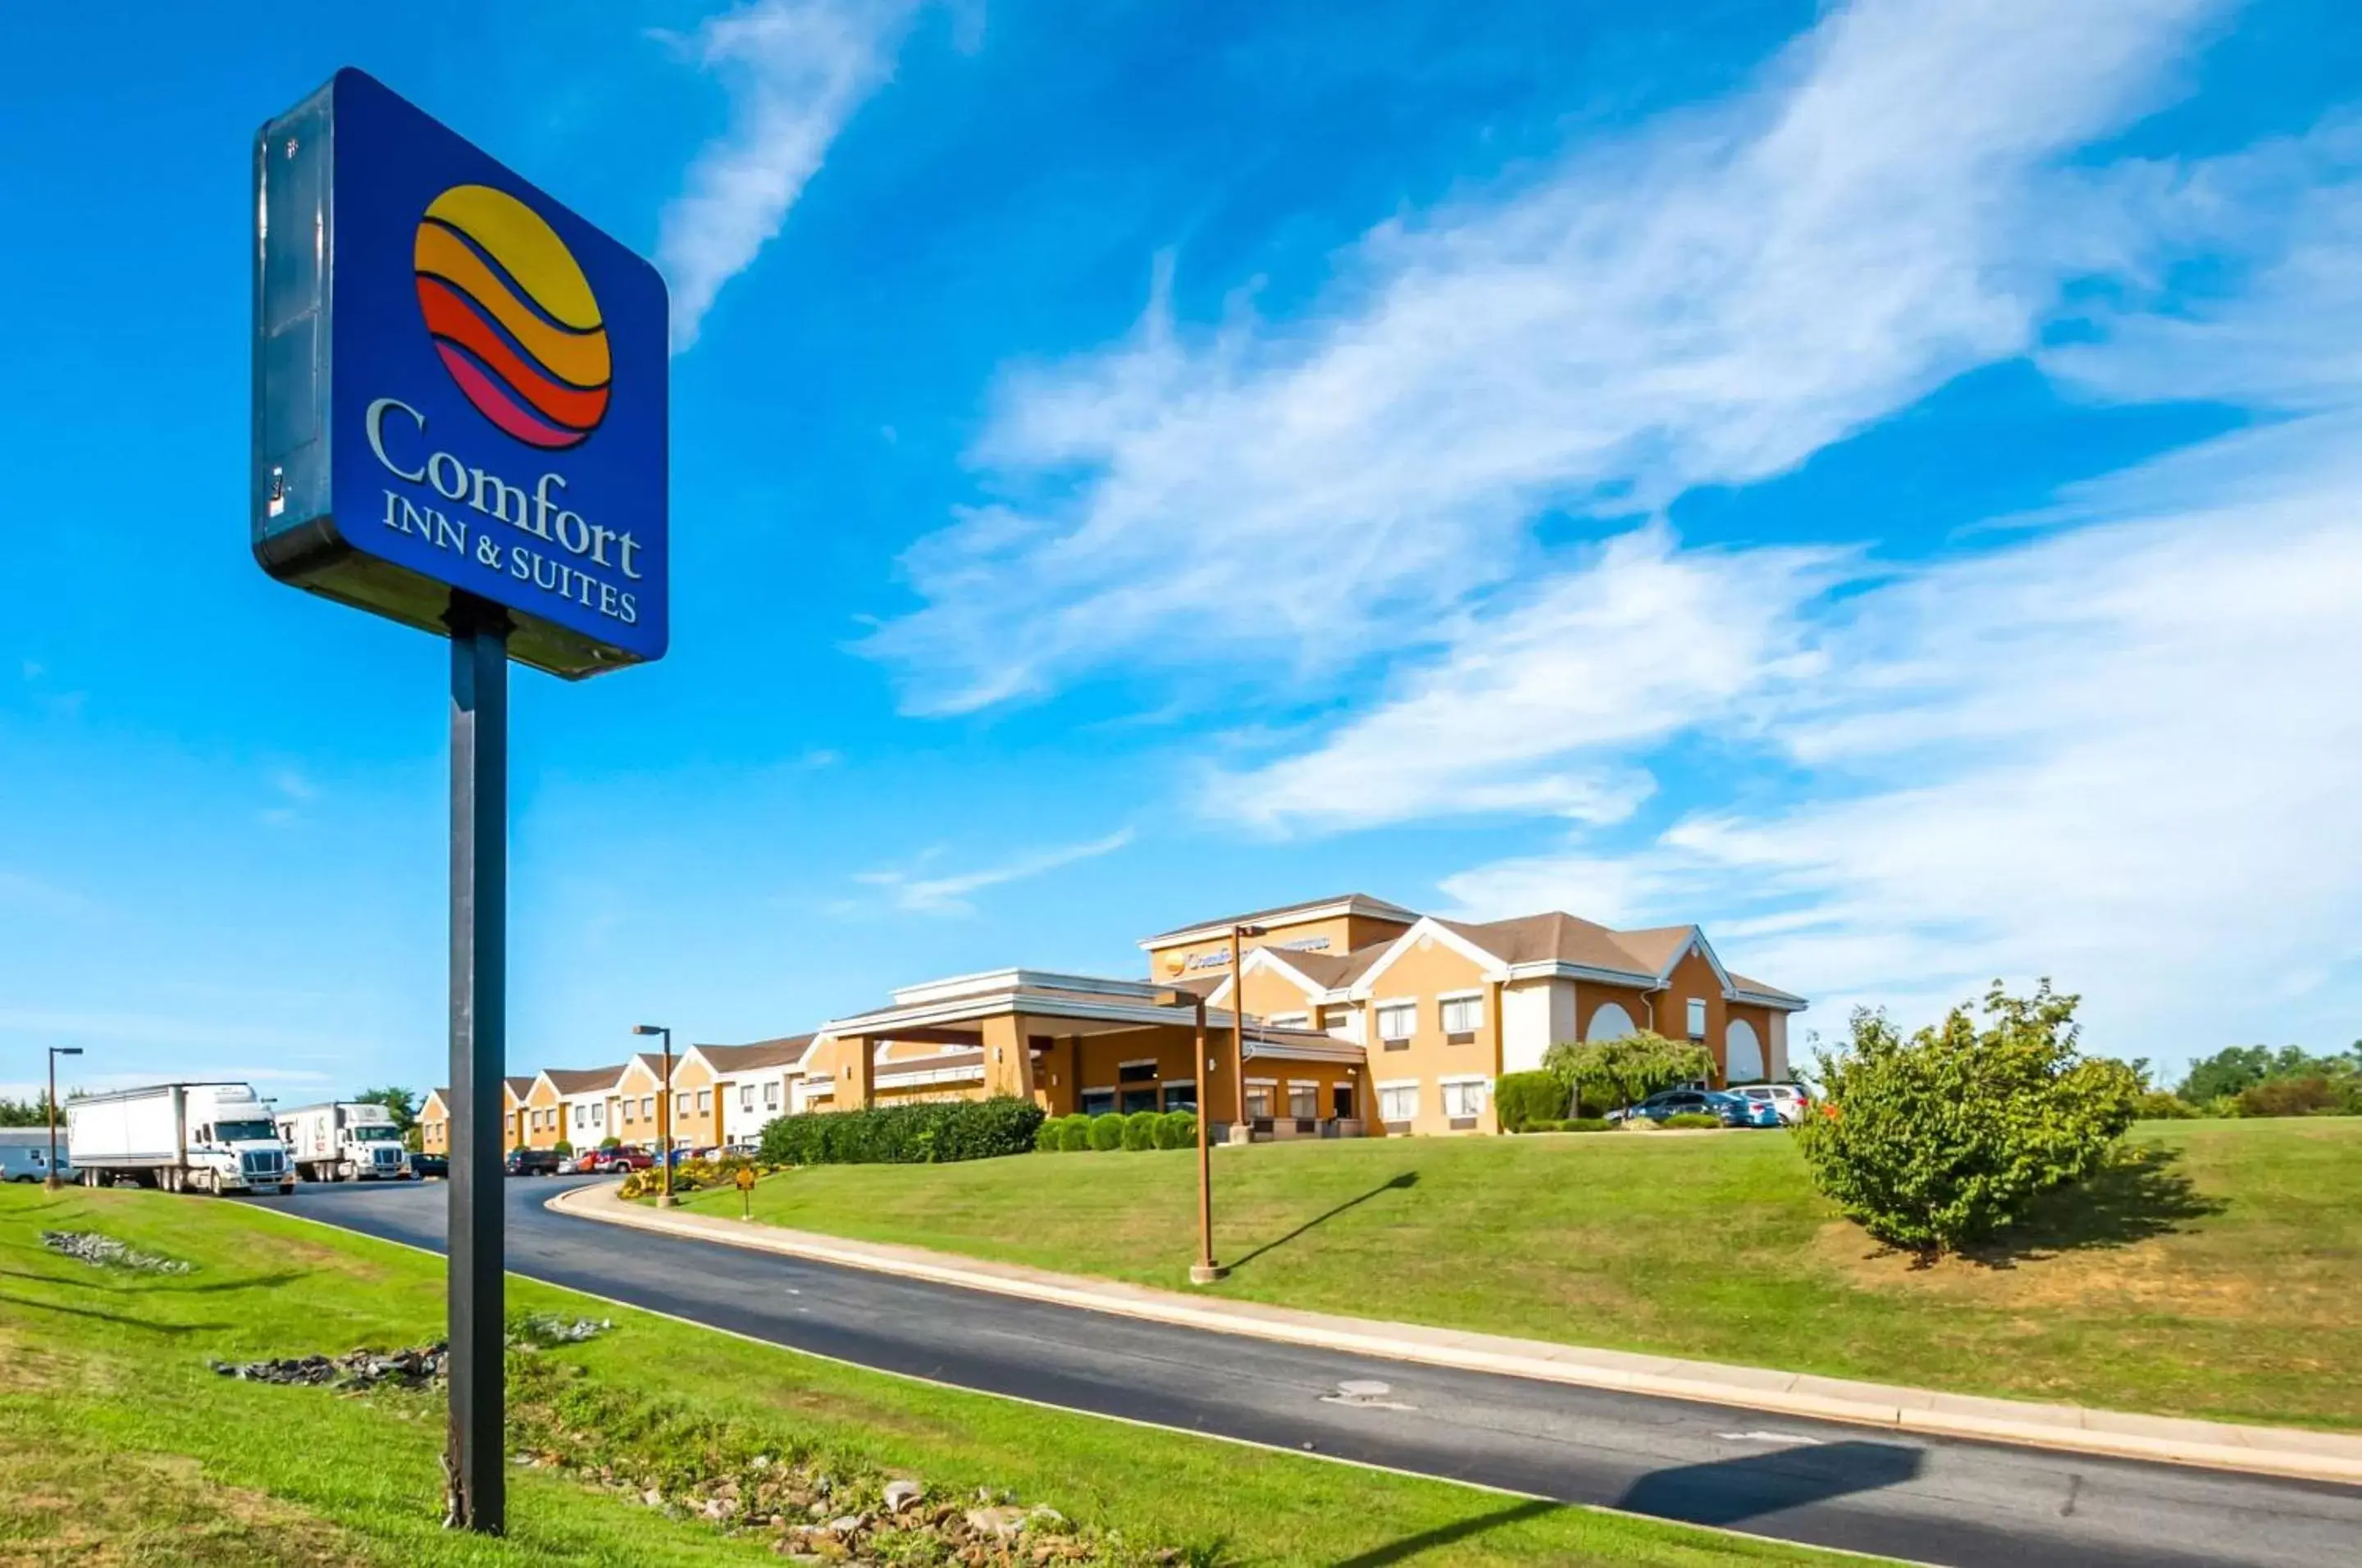 Property building in Comfort Inn and Suites North East